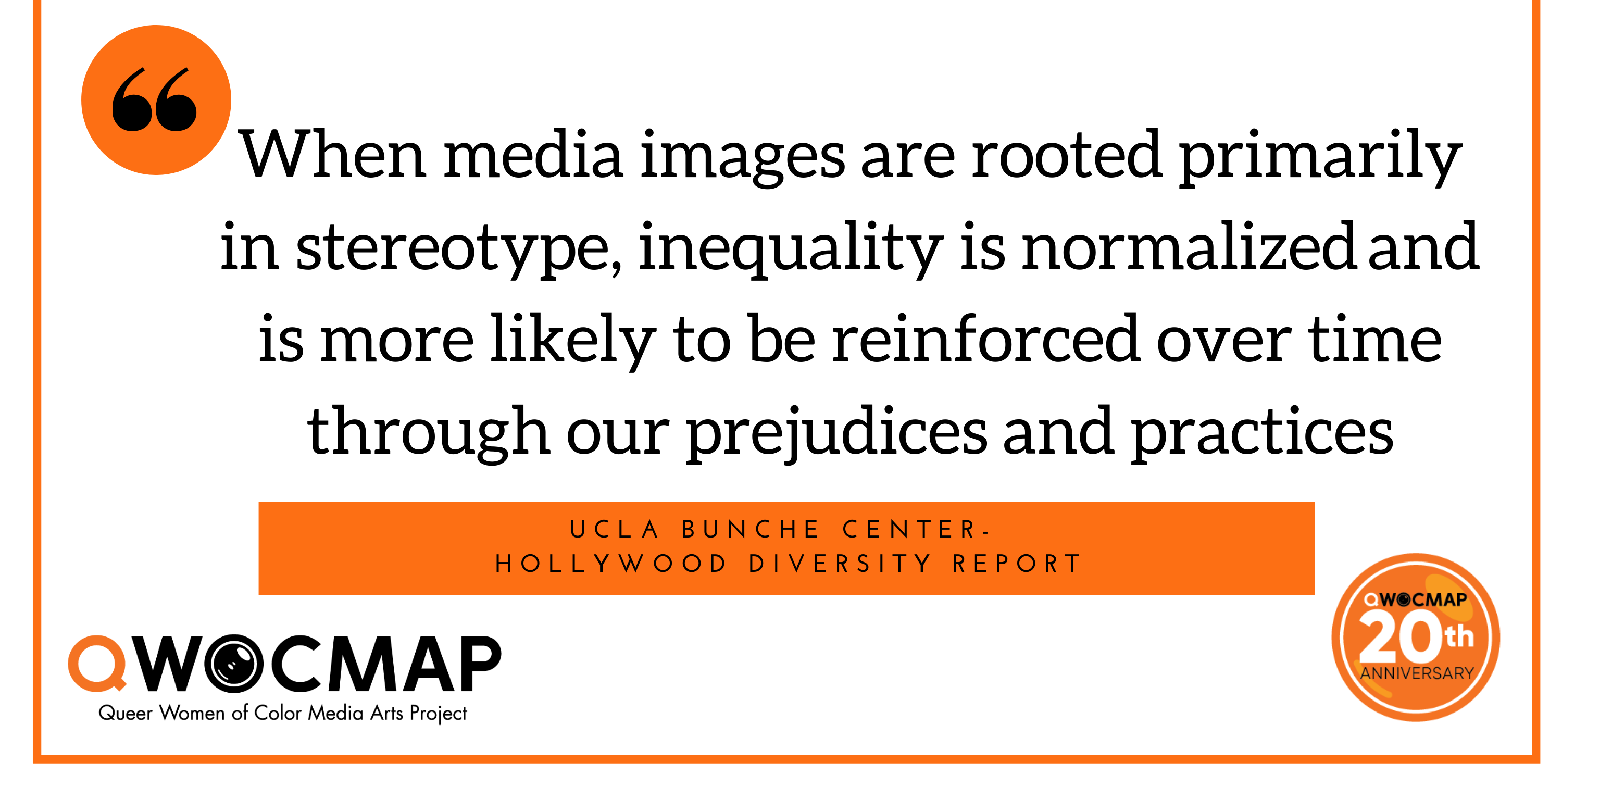 Black quoted text on a white background reads When media images are rooted primarily in stereotype, inequality is normalized and is more likely to be reinforced over time through our prejudices and practices. Below is an orange box with black text that reads UCLA Bunche Center - Hollywood Diversity Report. In the bottom corners are the black and orange QWOCMAP logo and the orange and white QWOCMAP 20th anniversary logo.